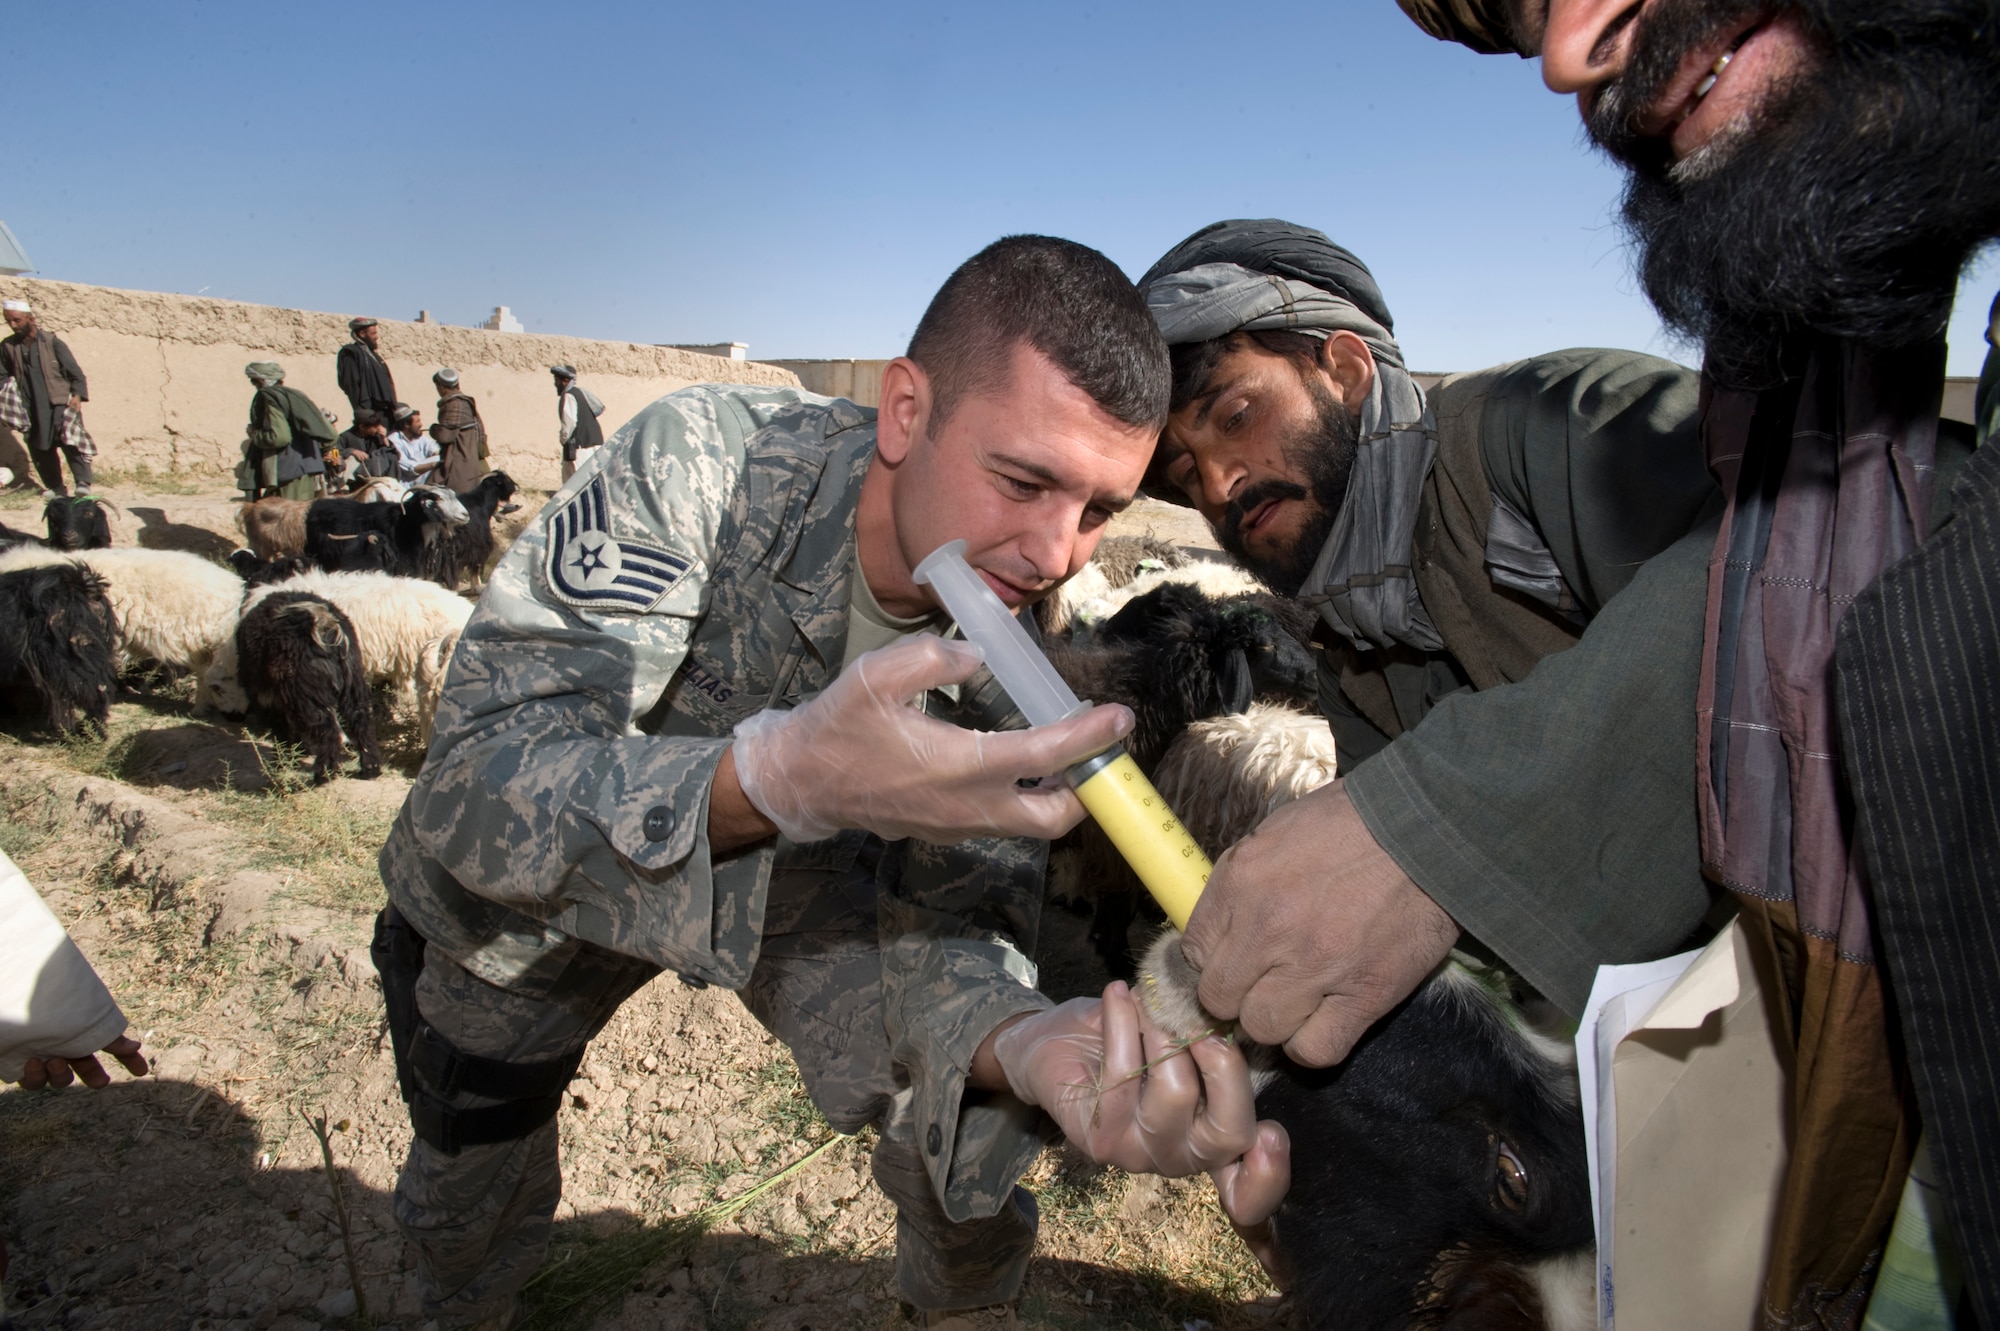 QALAT, Afghanistan -- Air Force Staff Sgt. Don Elias deworms livestock during a veterinary medical outreach conducted by the Zabul Provincial Reconstruction Team. The PRT members offered free deworming and vitamin supplements during the VMO. Sergeant Elias, a native of Buffalo, N.Y.,  is deployed from Wright-Patterson Air Force Base, Ohio. (U.S. Air Force photo/Master Sgt. Keith Brown)